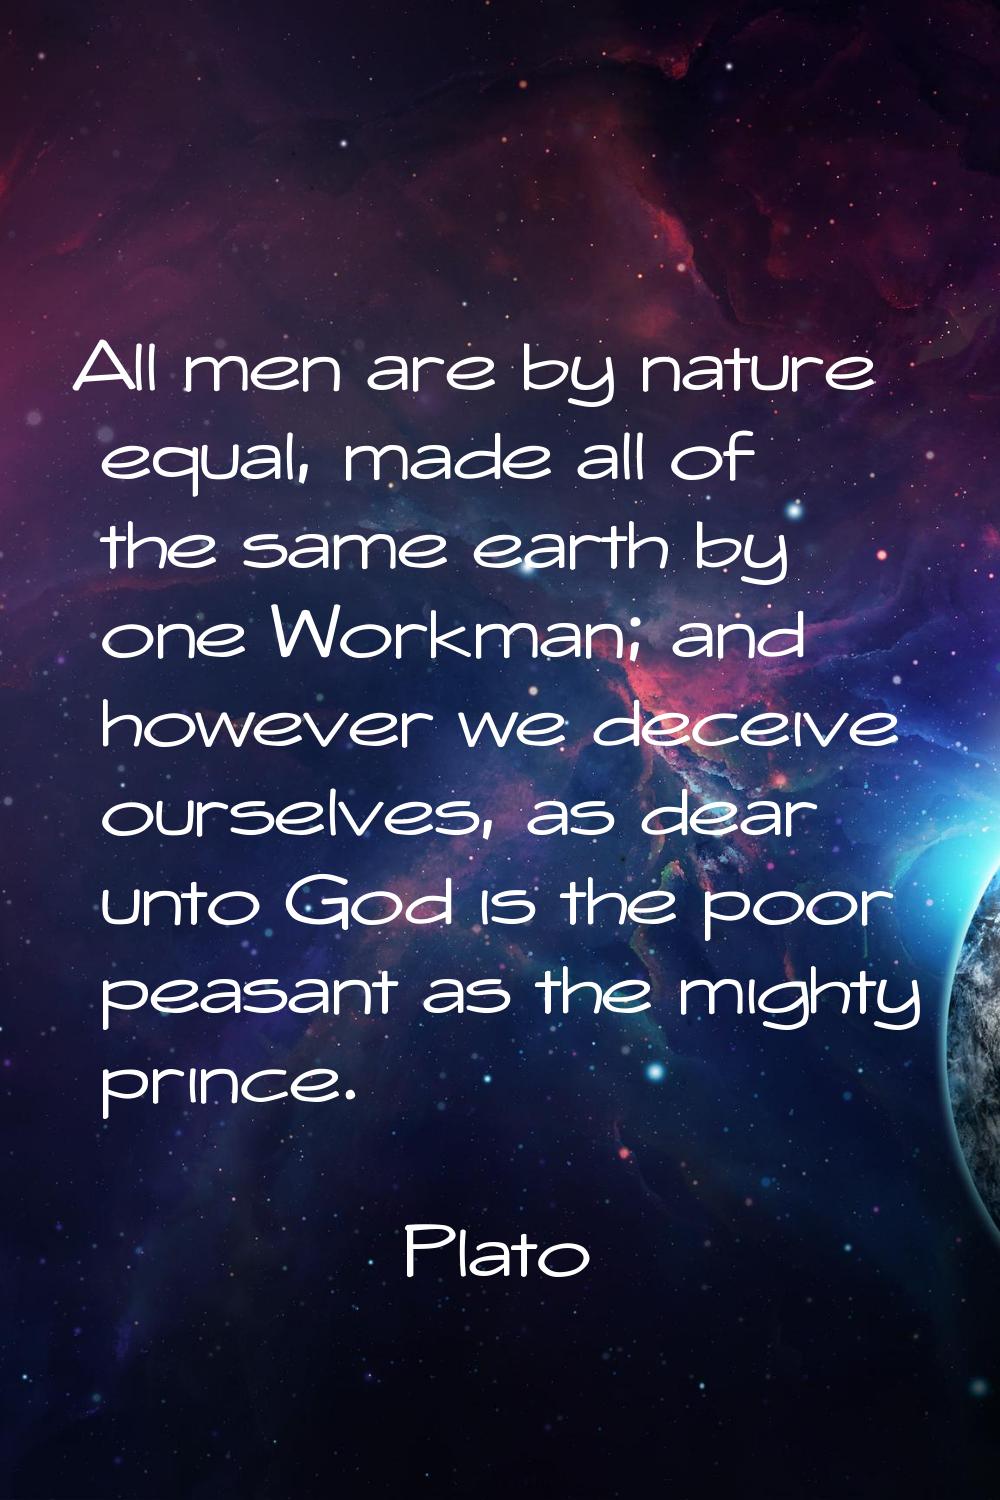 All men are by nature equal, made all of the same earth by one Workman; and however we deceive ours